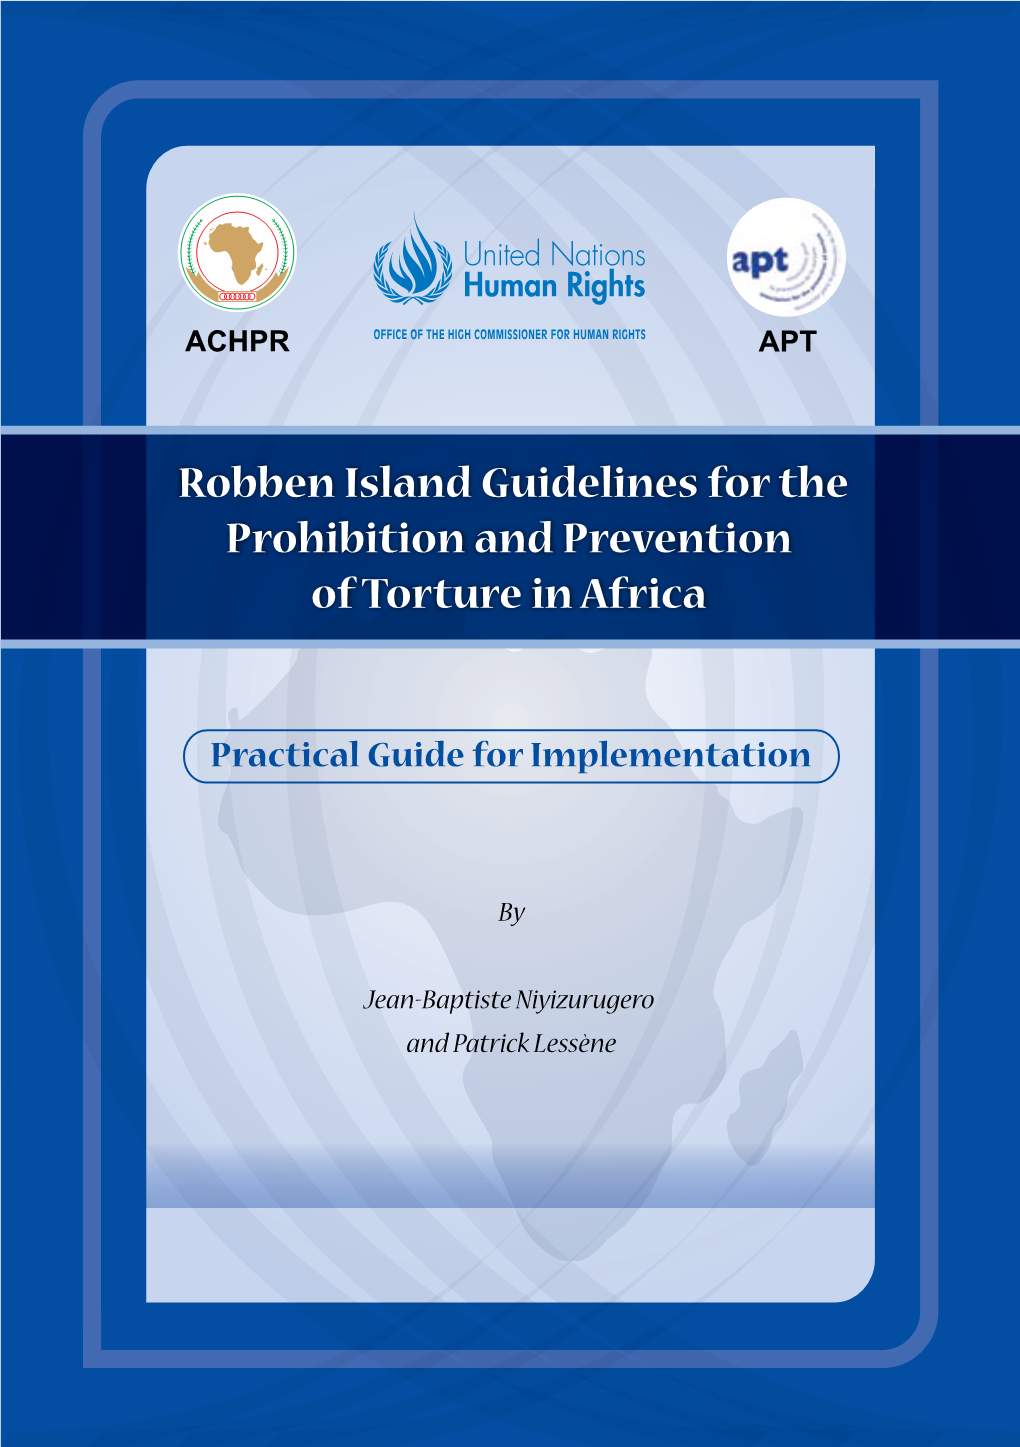 Robben Island Guidelines for the Prohibition and Prevention of Torture in Africa